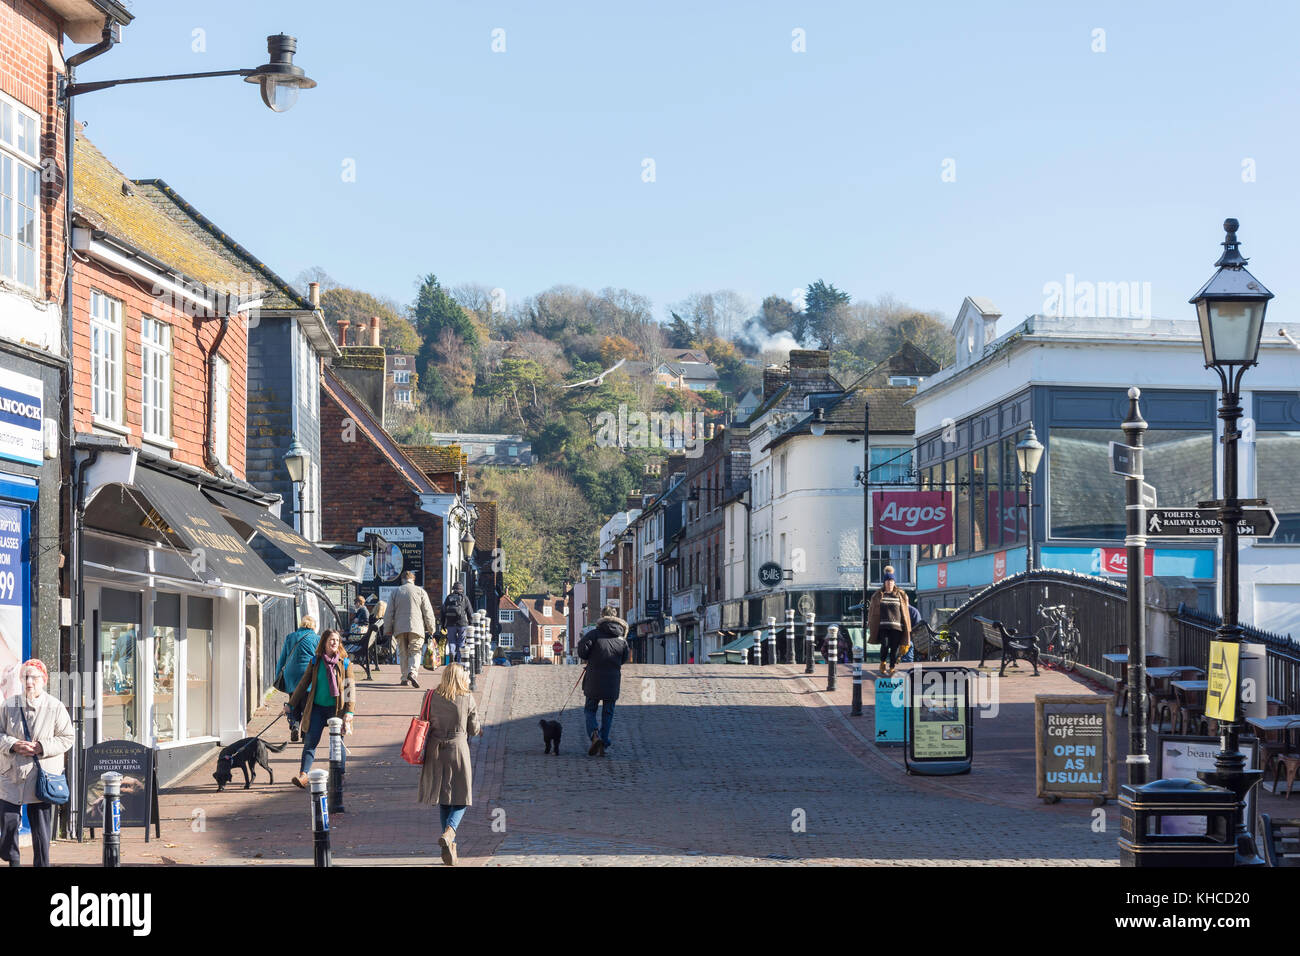 Cliffe High Street, Lewes, East Sussex, England, United Kingdom Stock Photo